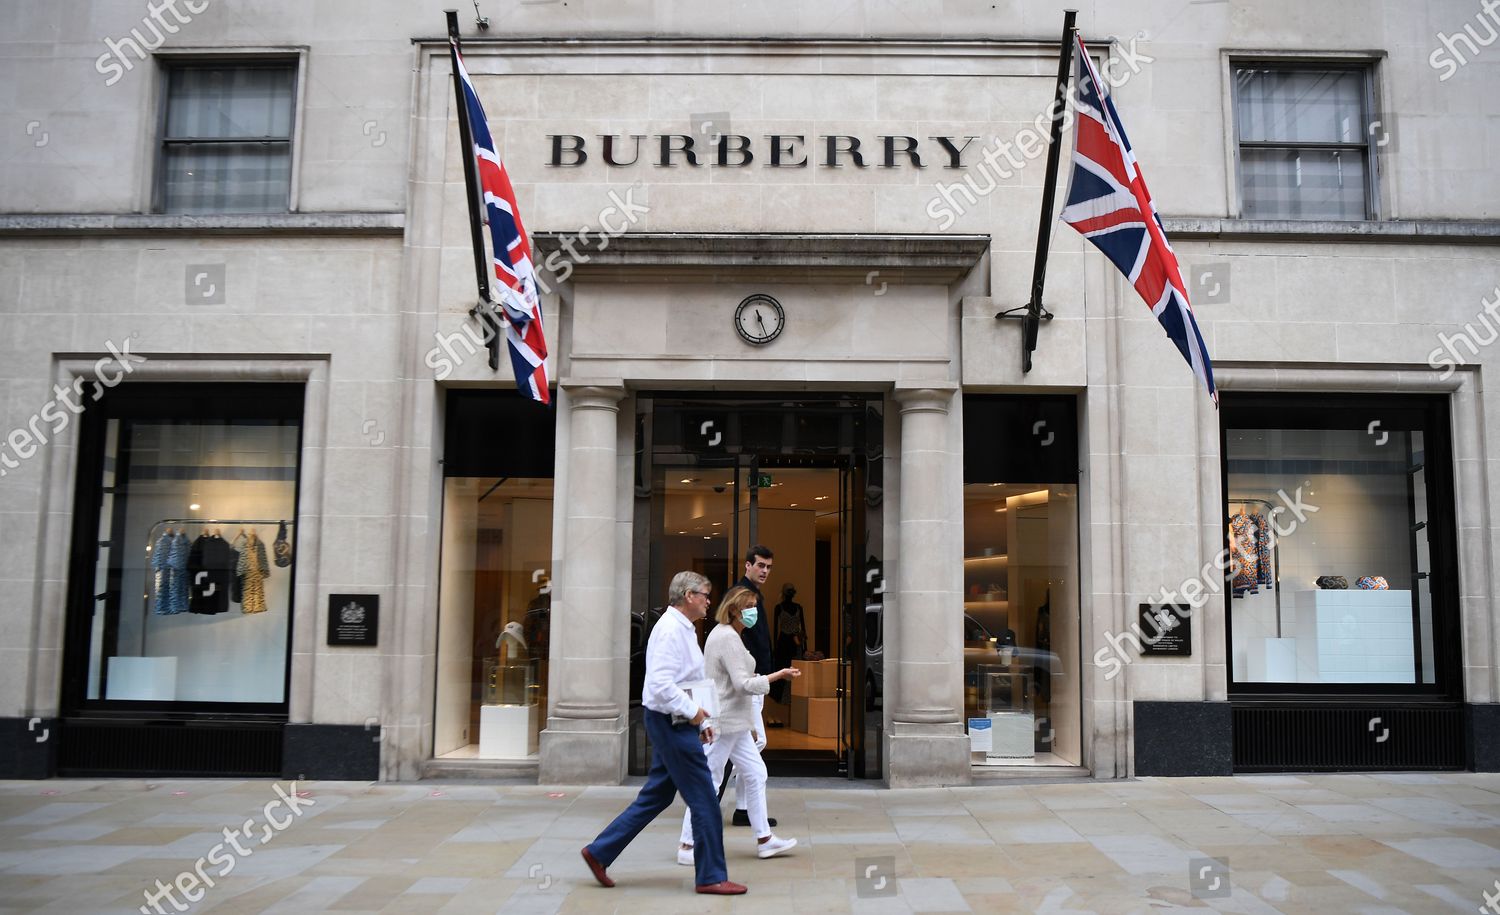 Burberry store London Britain 15 July 2020 Editorial Photo - Stock Image | Shutterstock